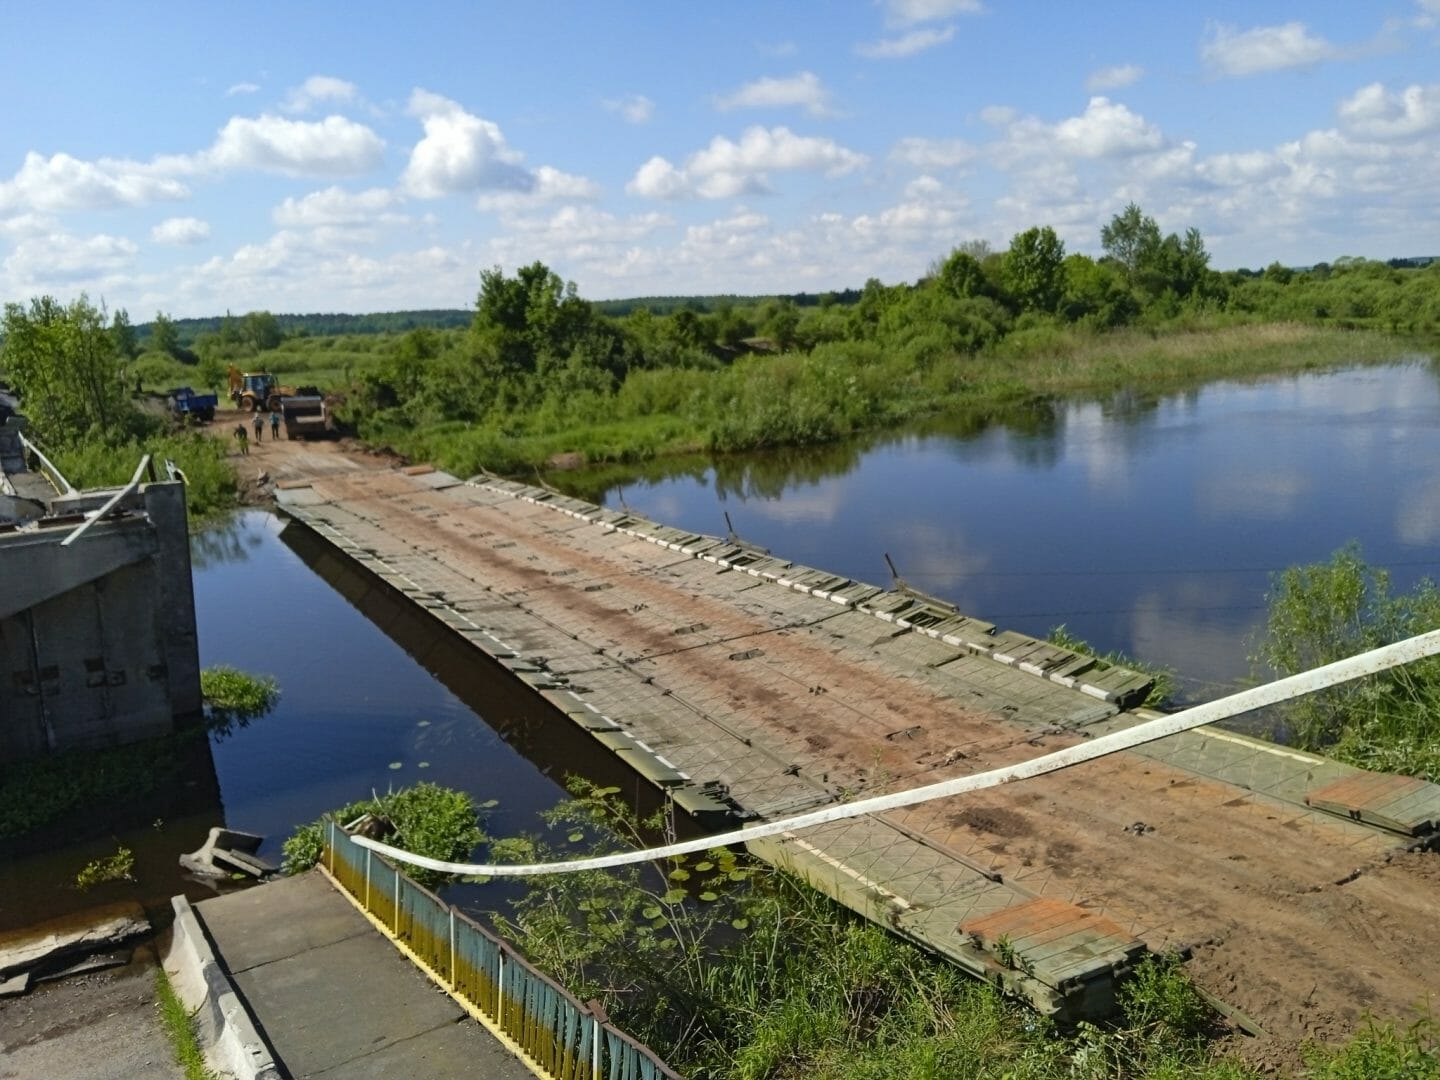 Pontoon crossing in place of destroyed bridge on the Uzh river